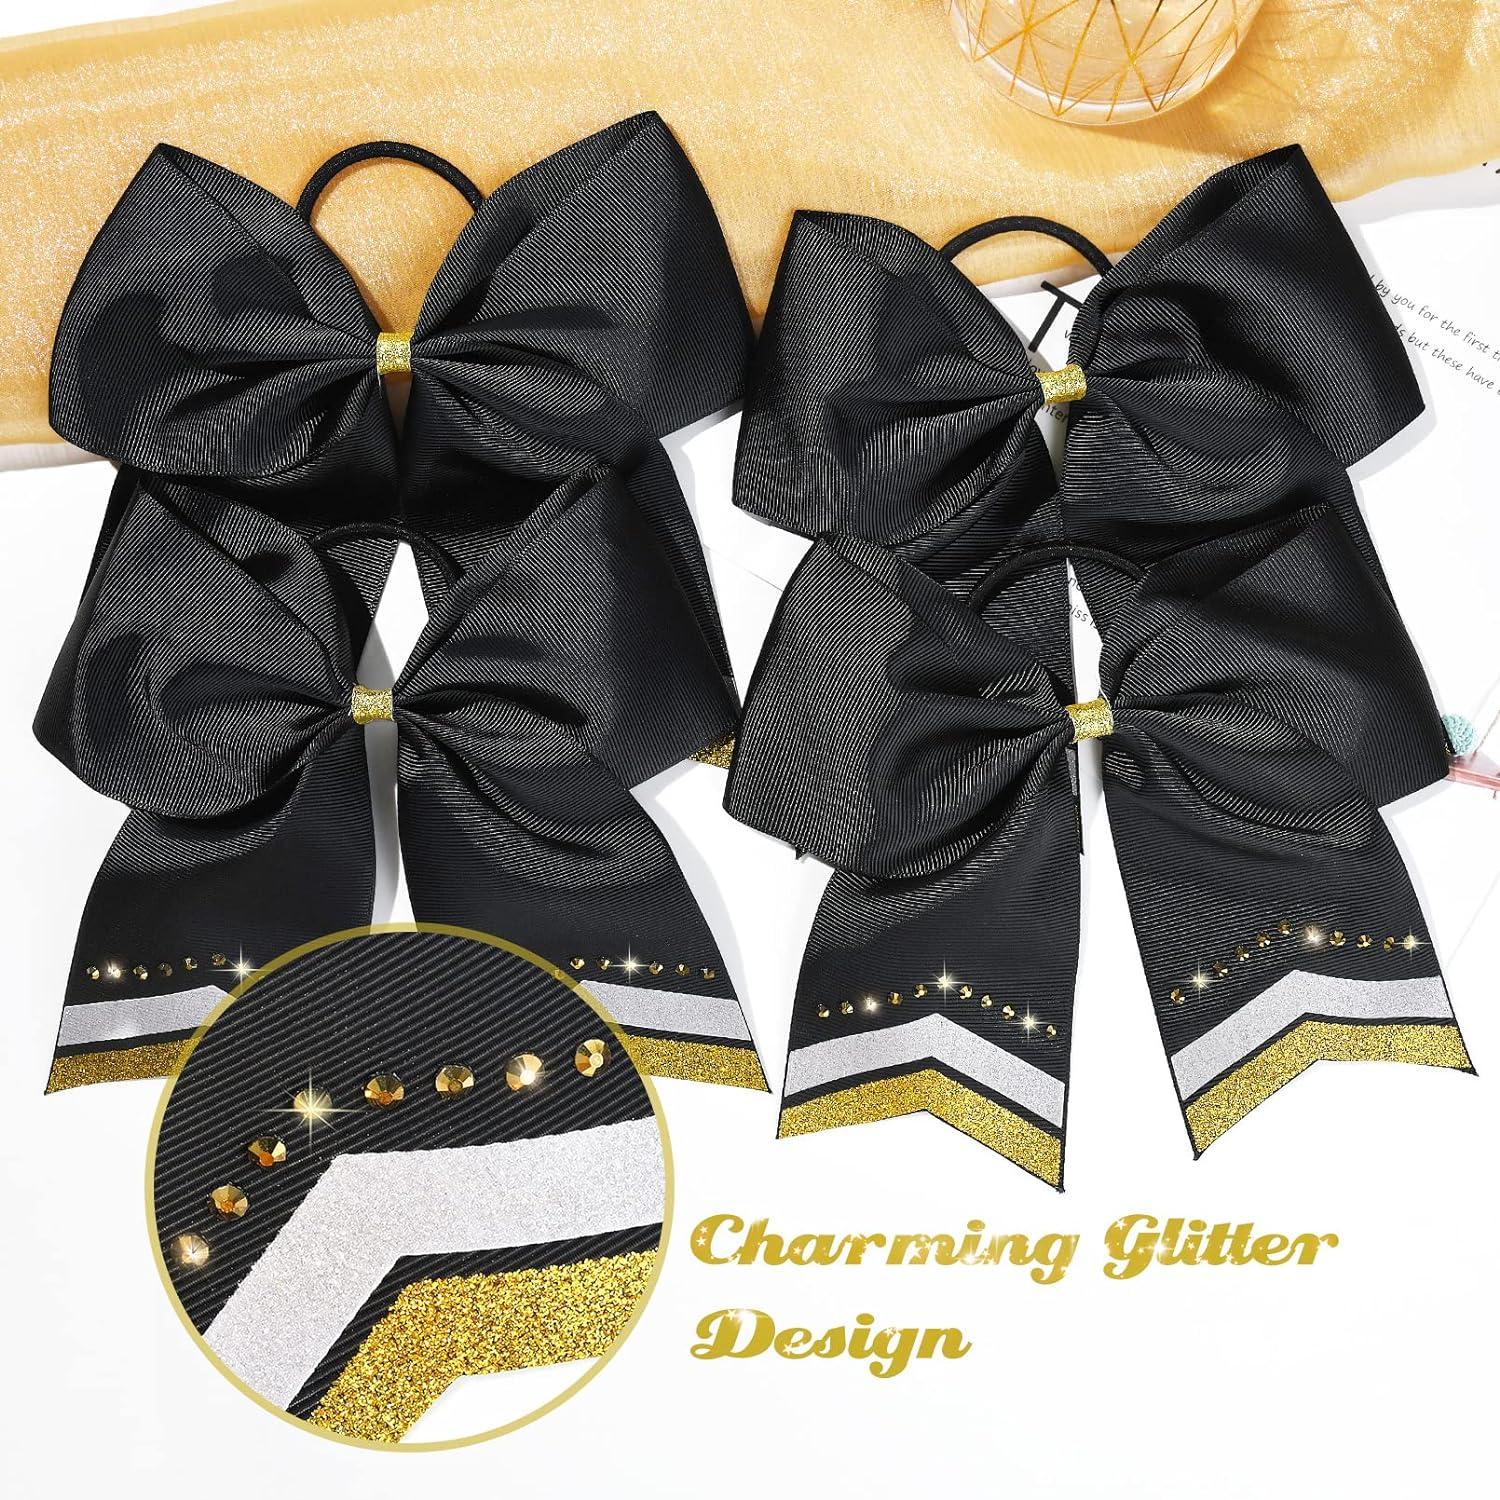 Bows, High-quality cheerleading uniforms, cheer shoes, cheer bows, cheer  accessories, and more